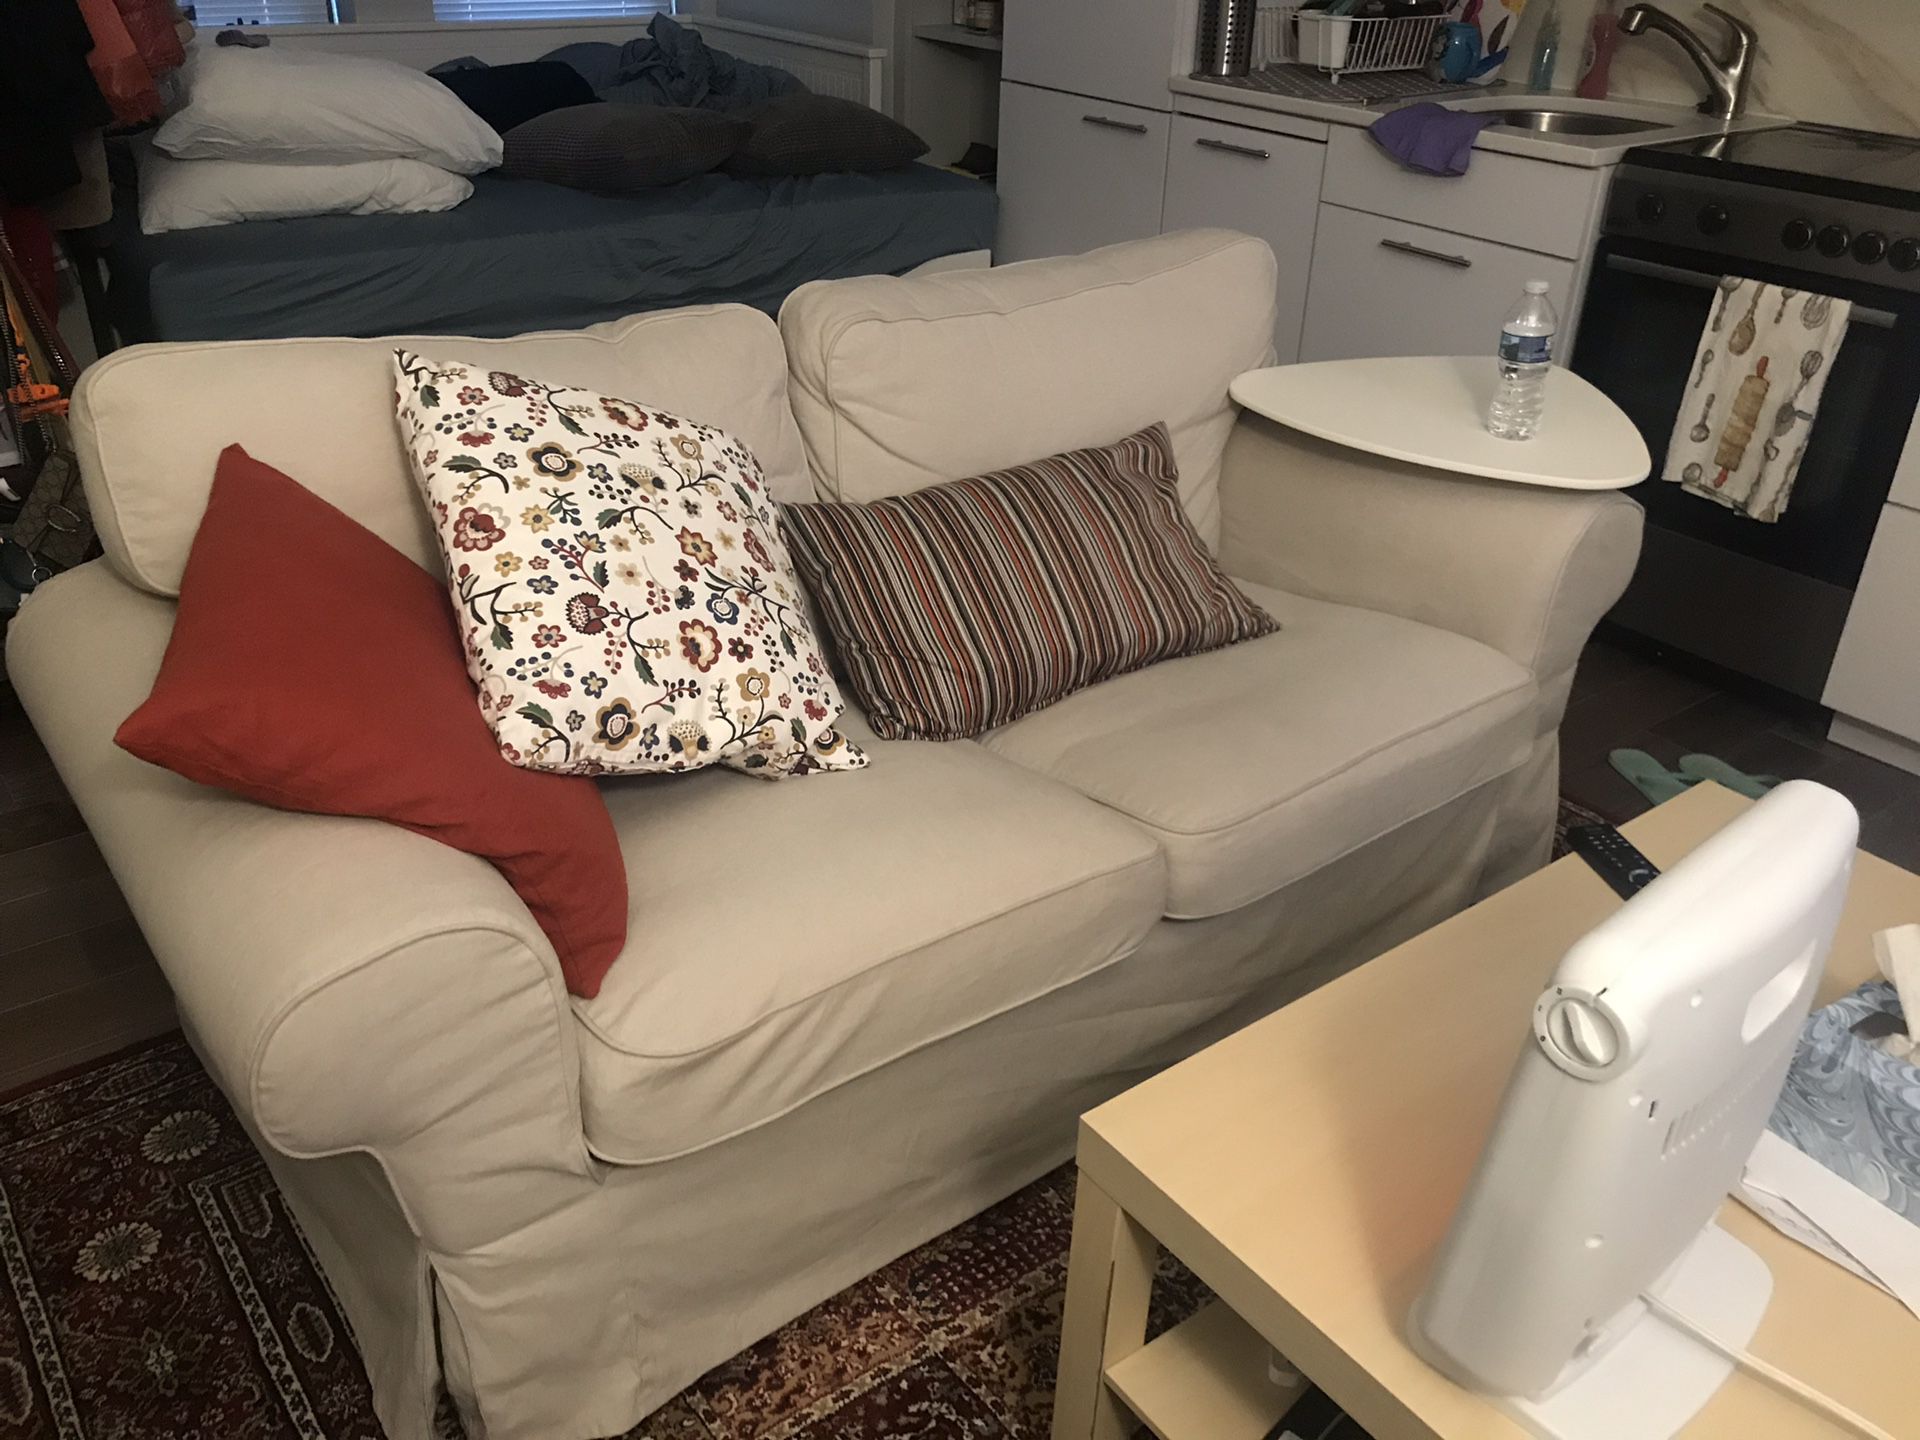 FREE Couch,laptop table, and carpet